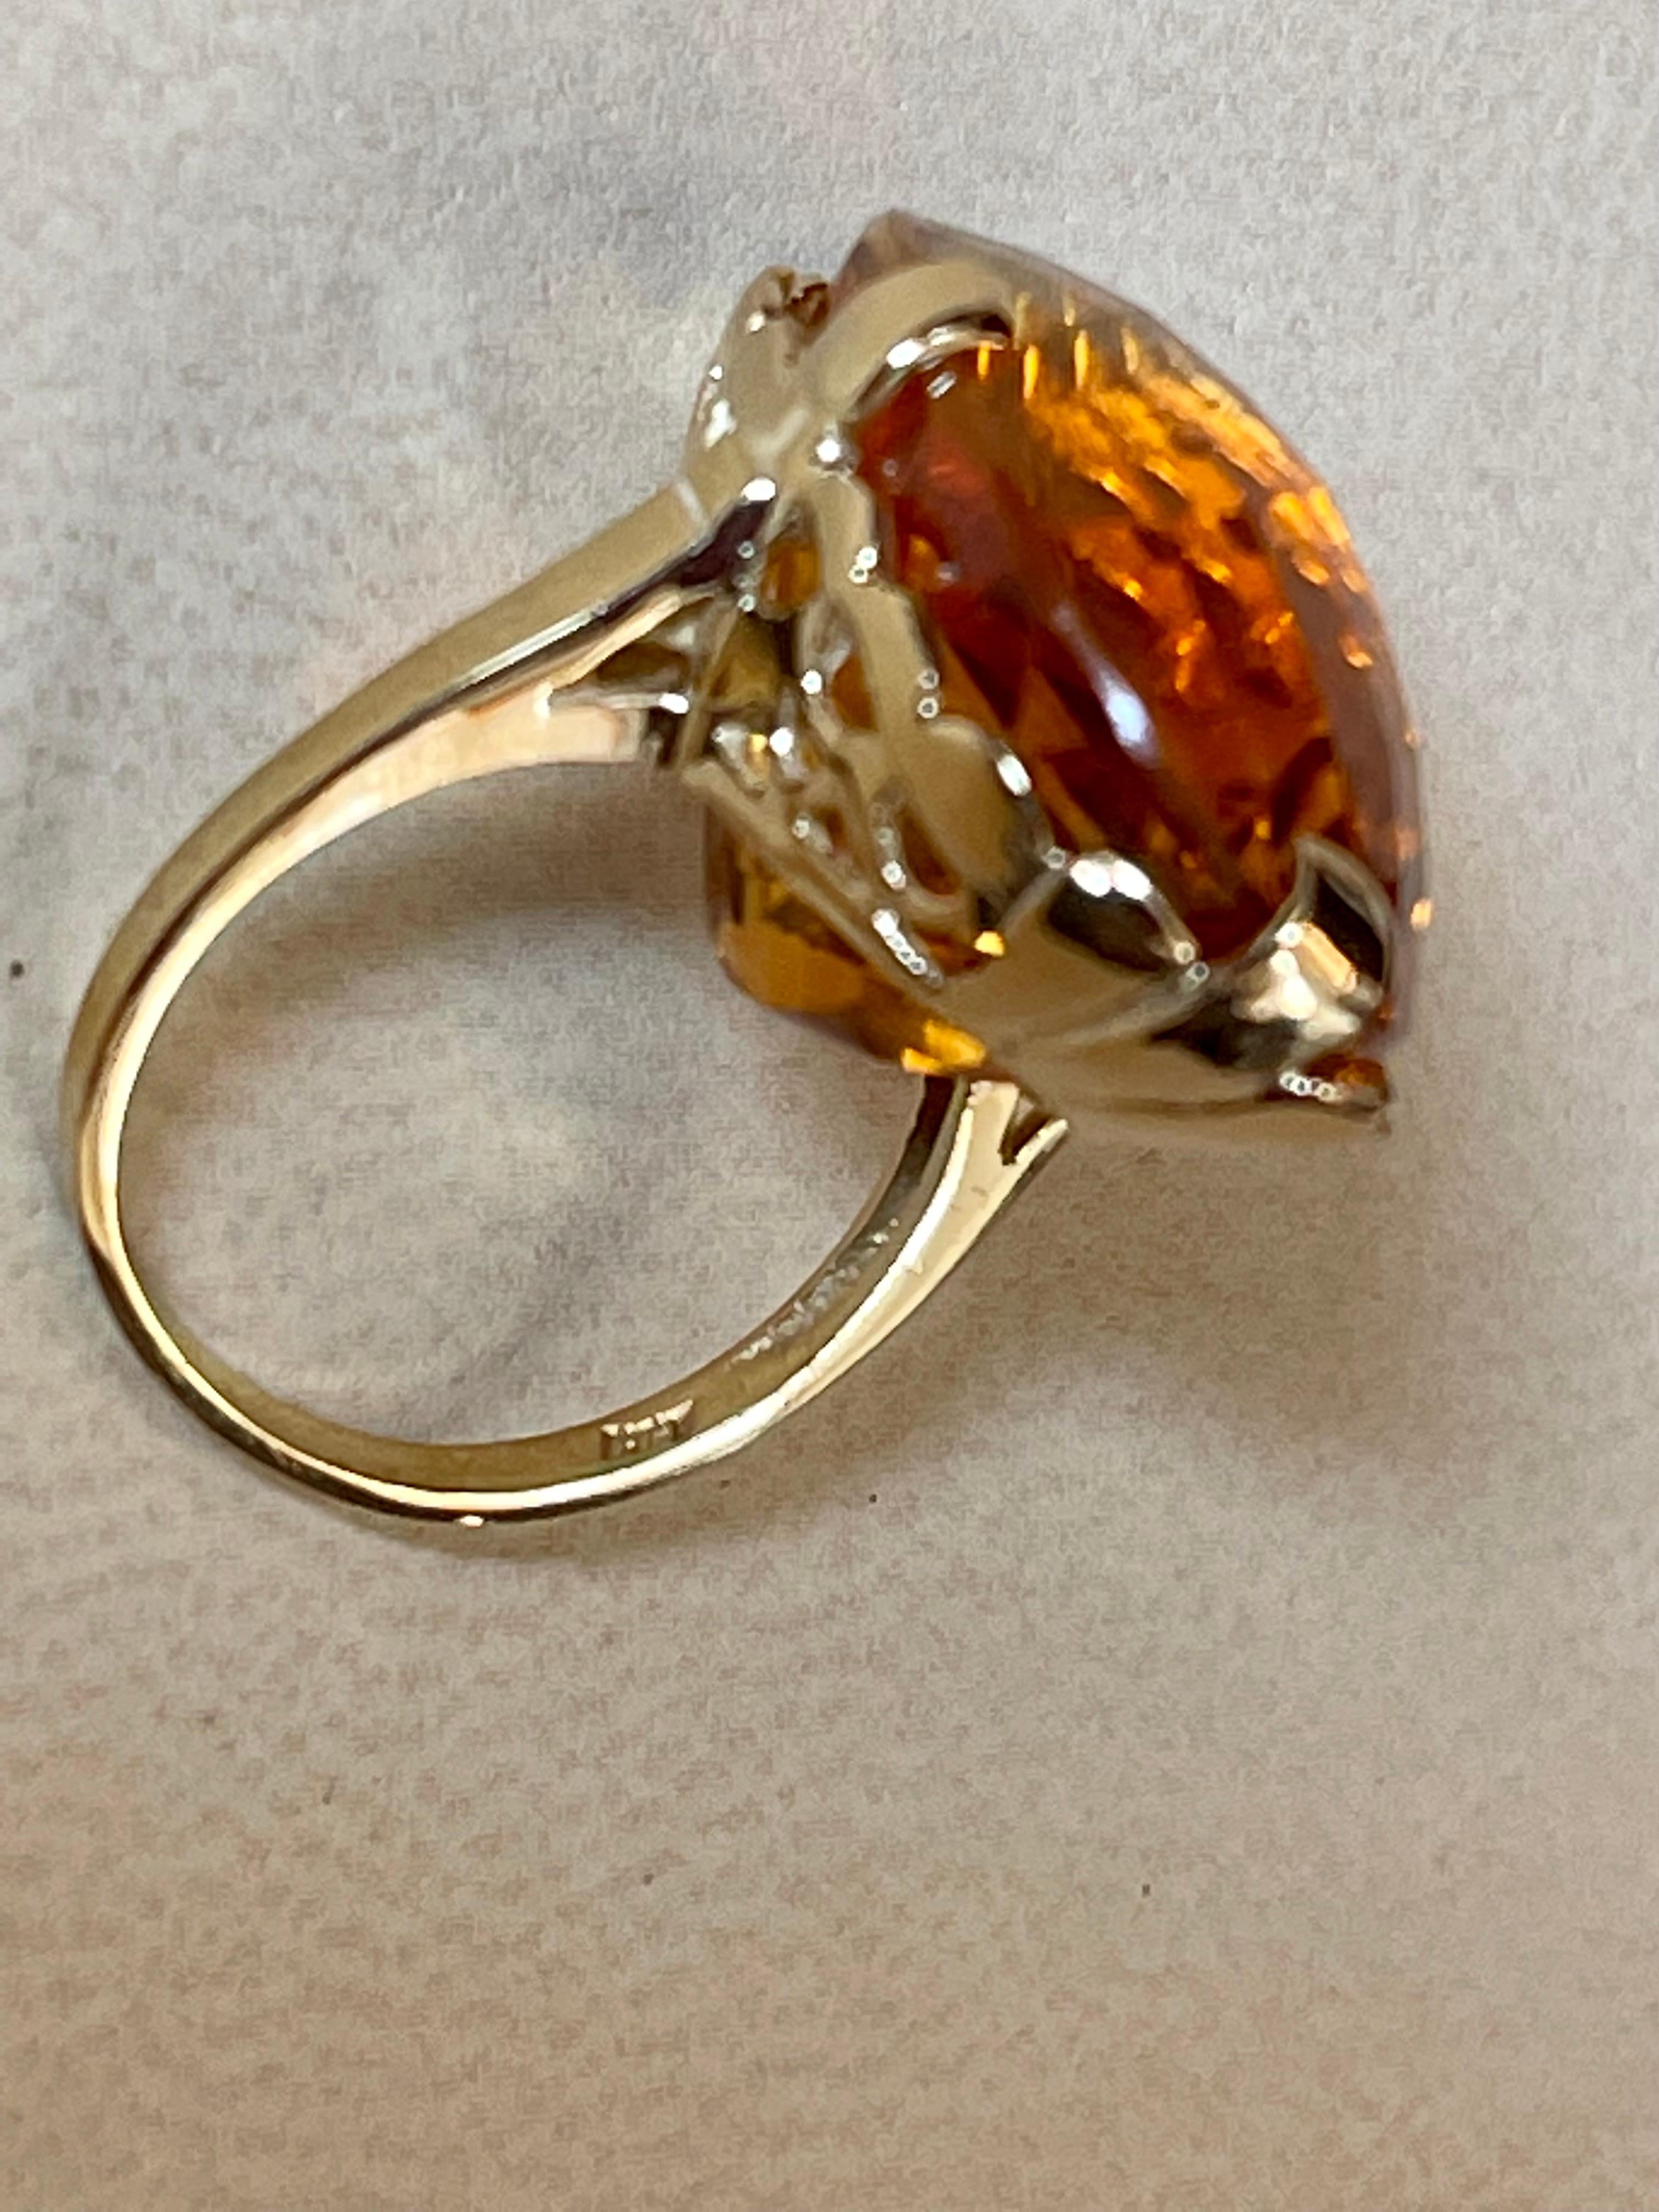 20 Carat Natural Oval Citrine Cocktail Ring in 14 Karat Yellow Gold, Estate For Sale 1